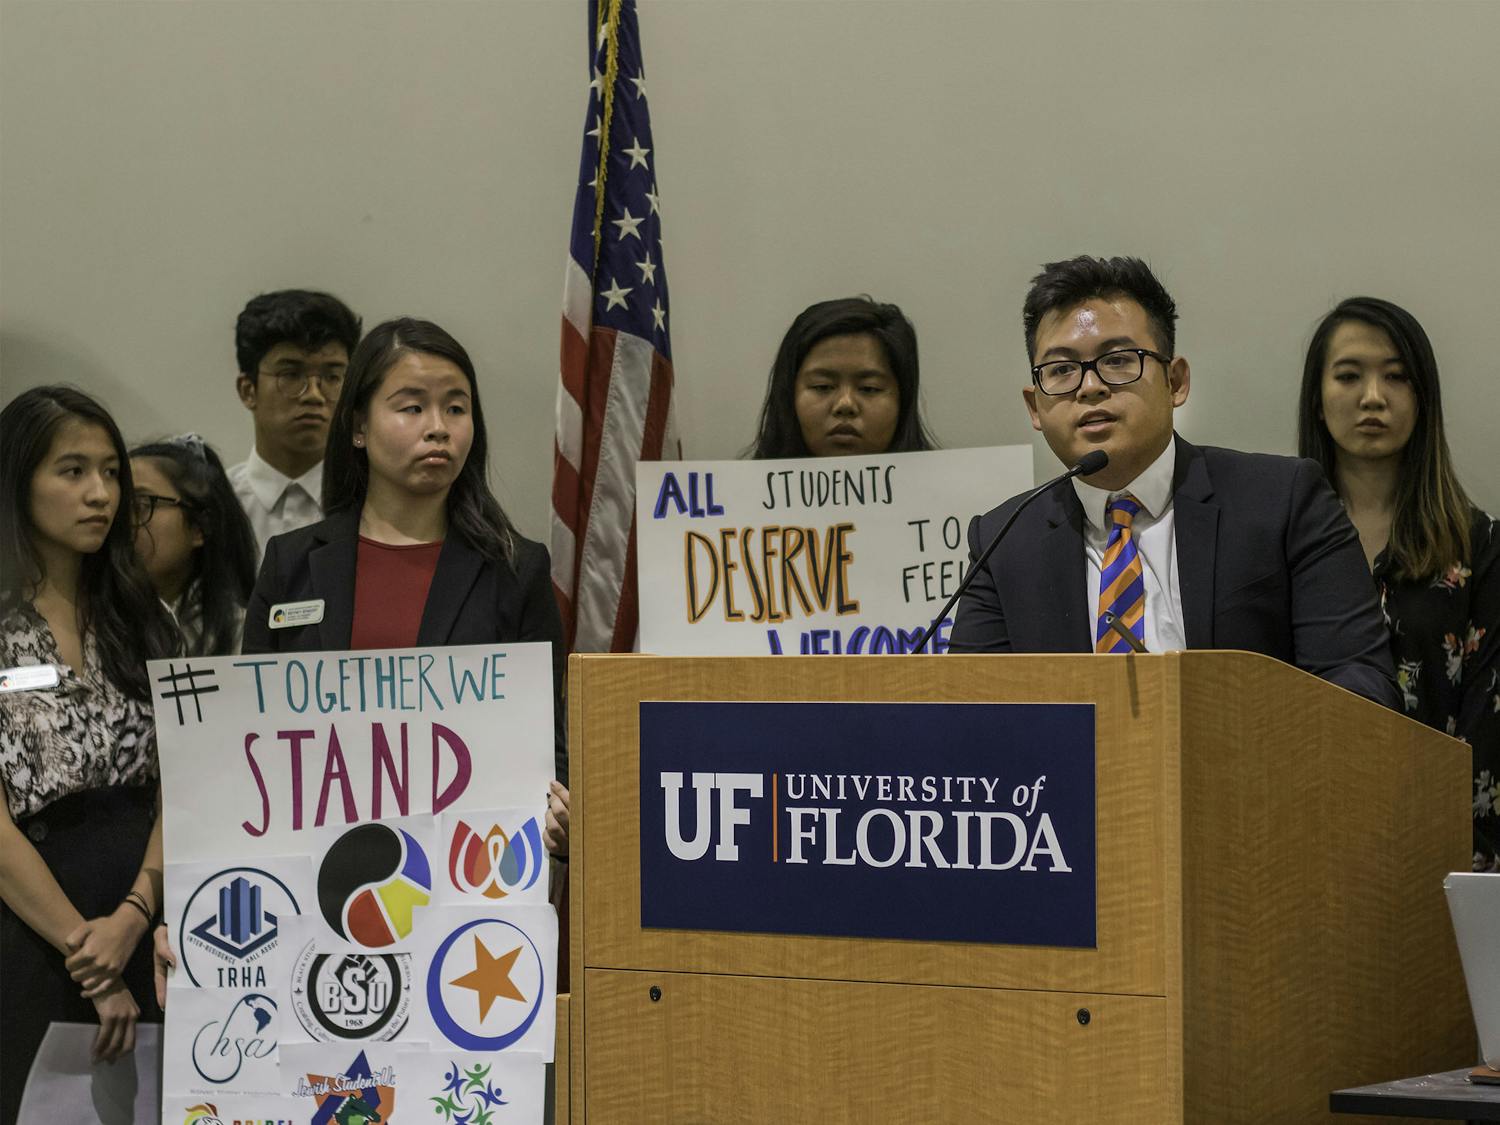 Kevin Nguyen, president of the Vietnamese Student Organization, speaks during the public comment part of the UF Student Government Senate meeting on Aug. 6. Nguyen began by stating things SG members all have in common. He said that they were all Gators, all served in the Senate and all could make a difference. “We all have the potential to do something great,” Nguyen said.